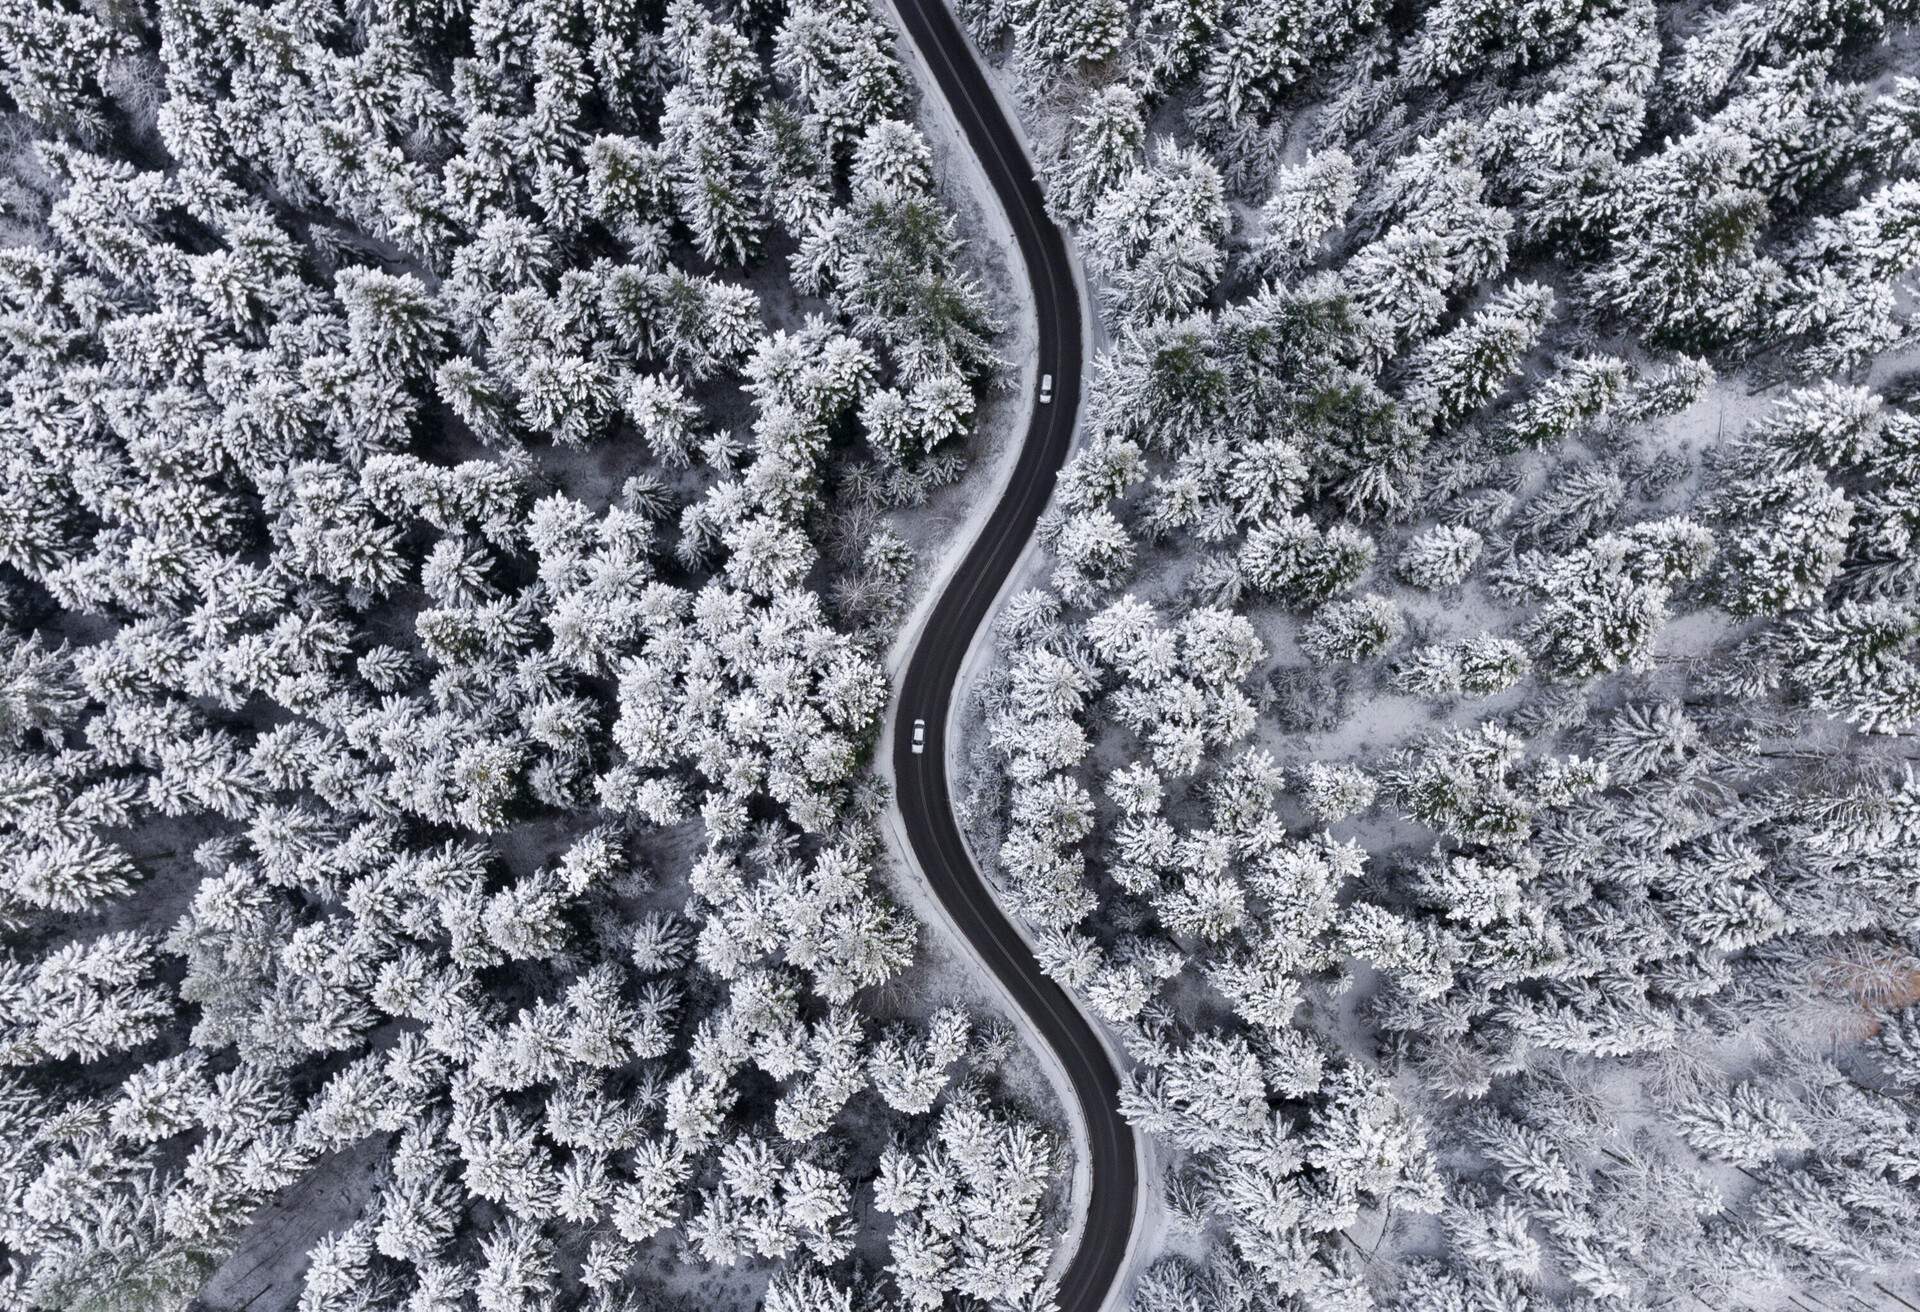 A winding road in between tall trees covered in snow.